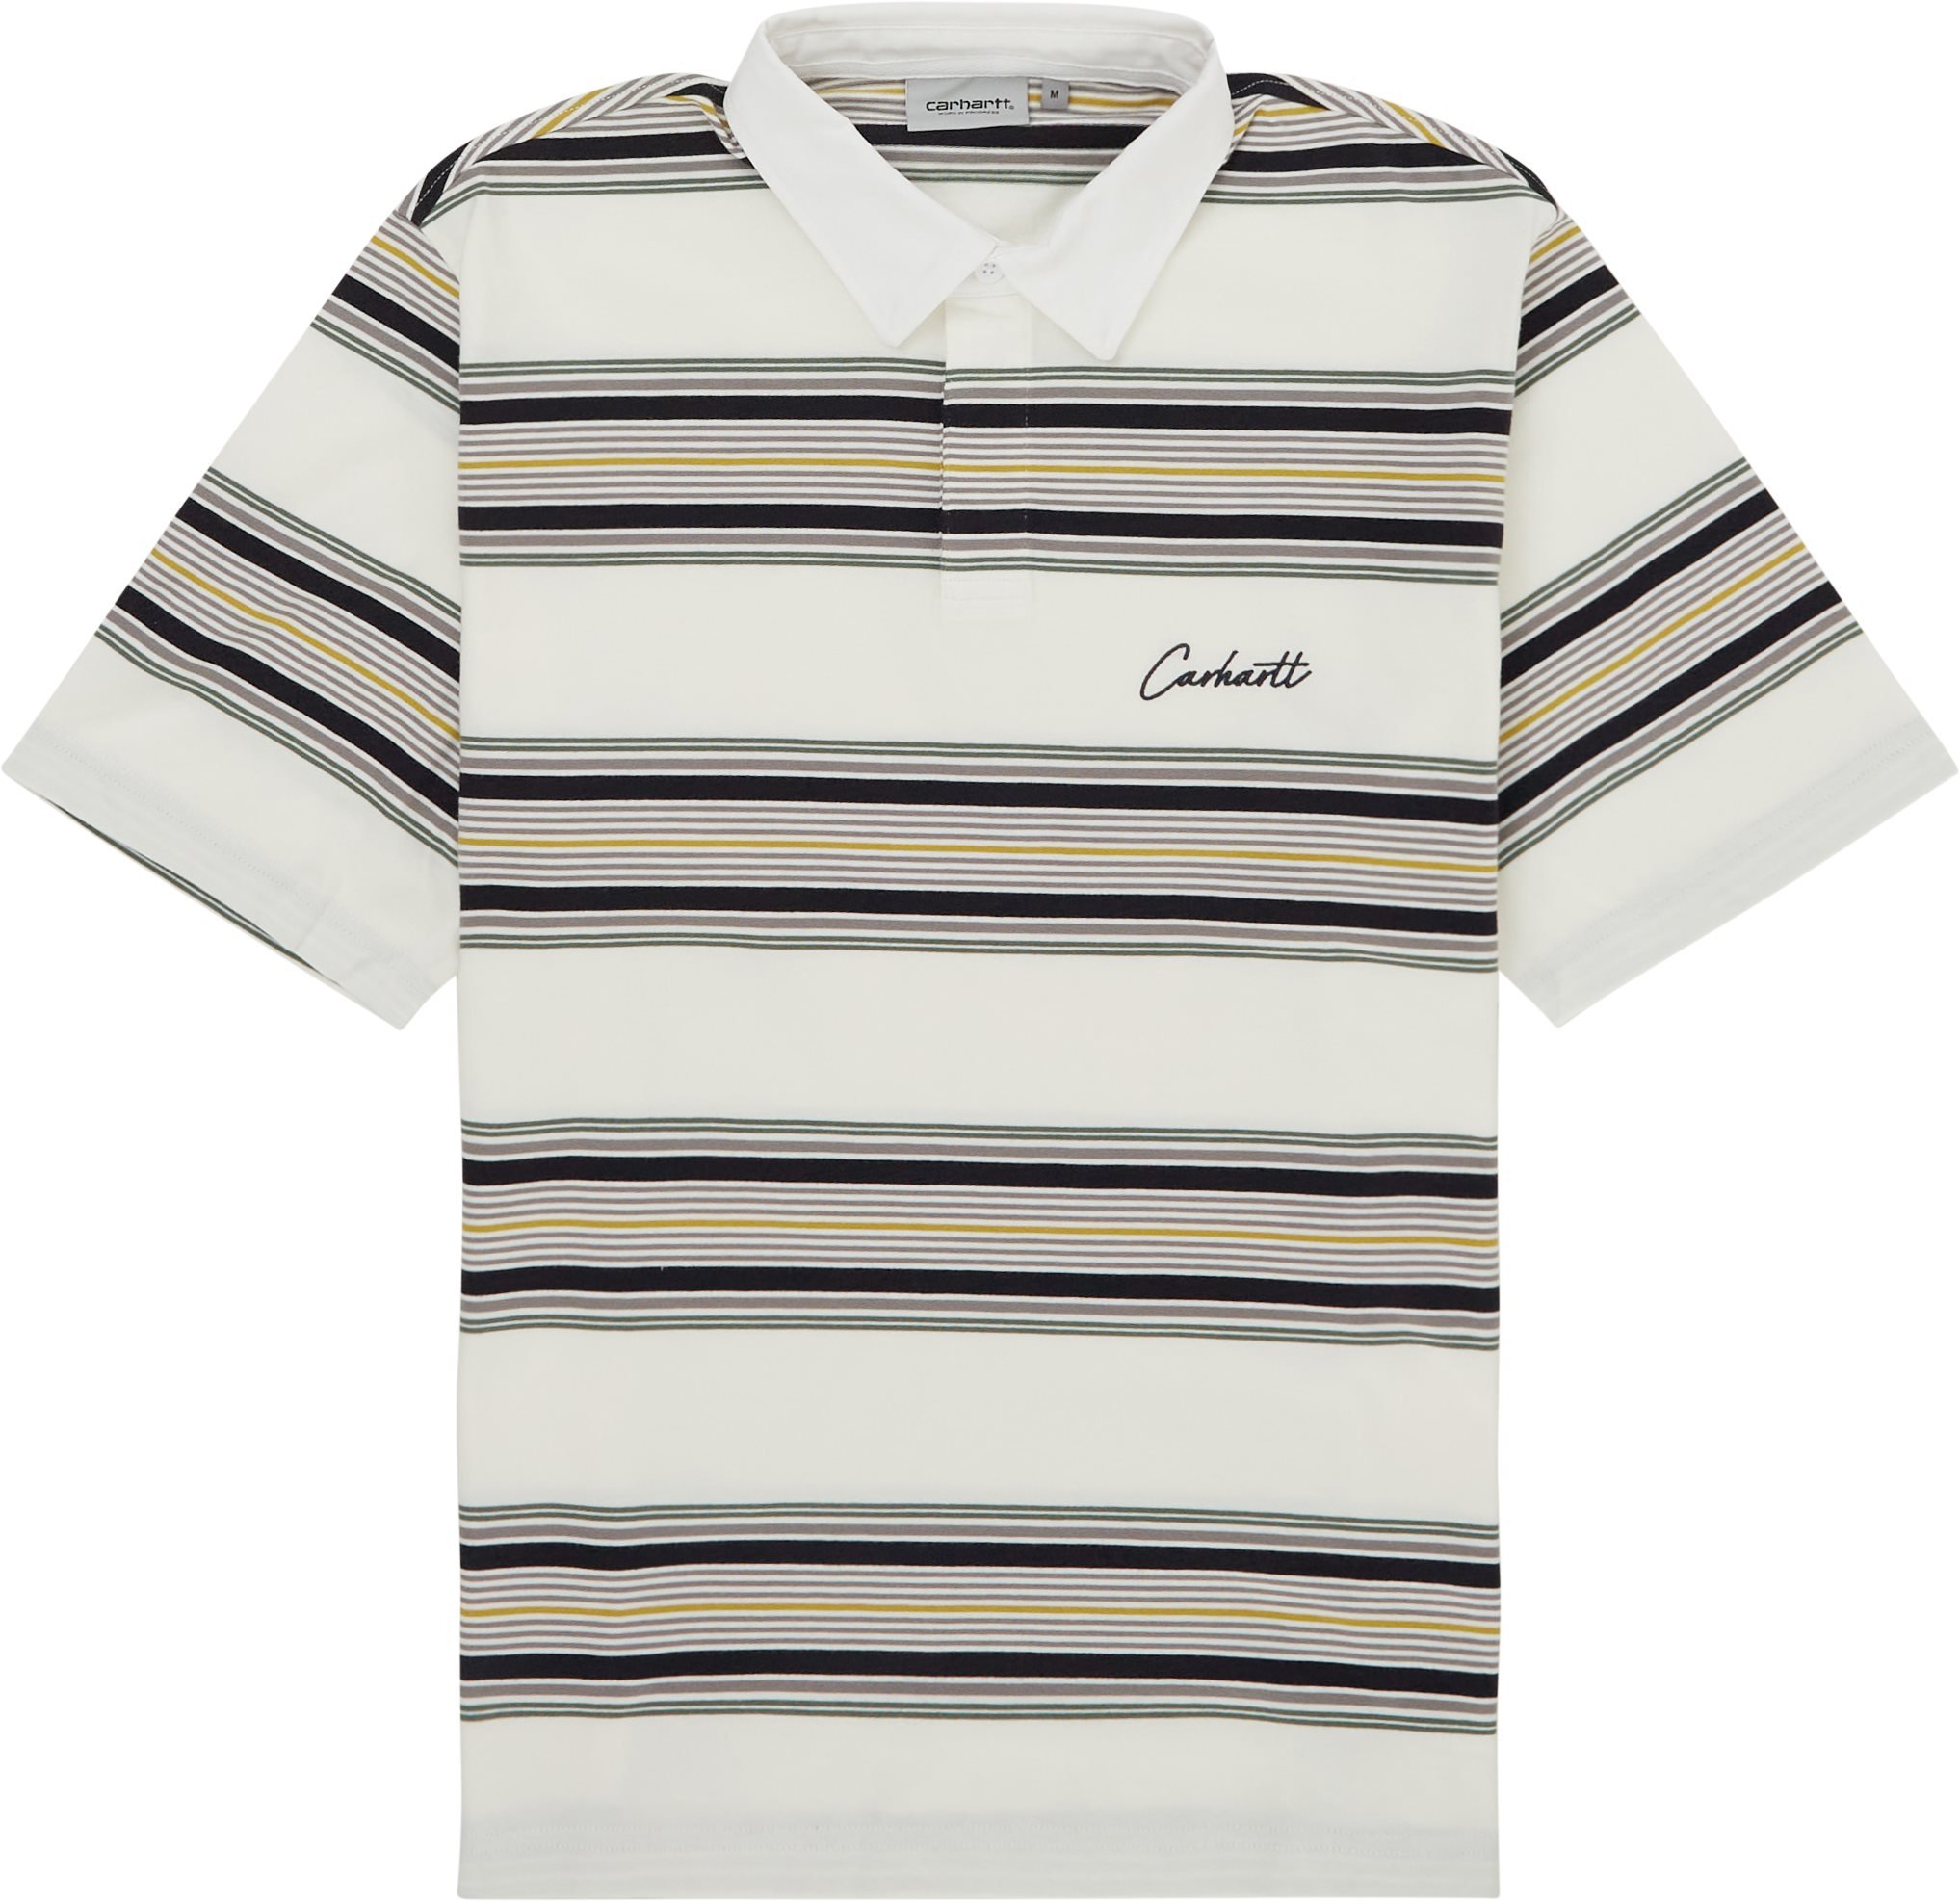 Carhartt WIP T-shirts S/S GAINES RUGBY SHIRT I033614 White